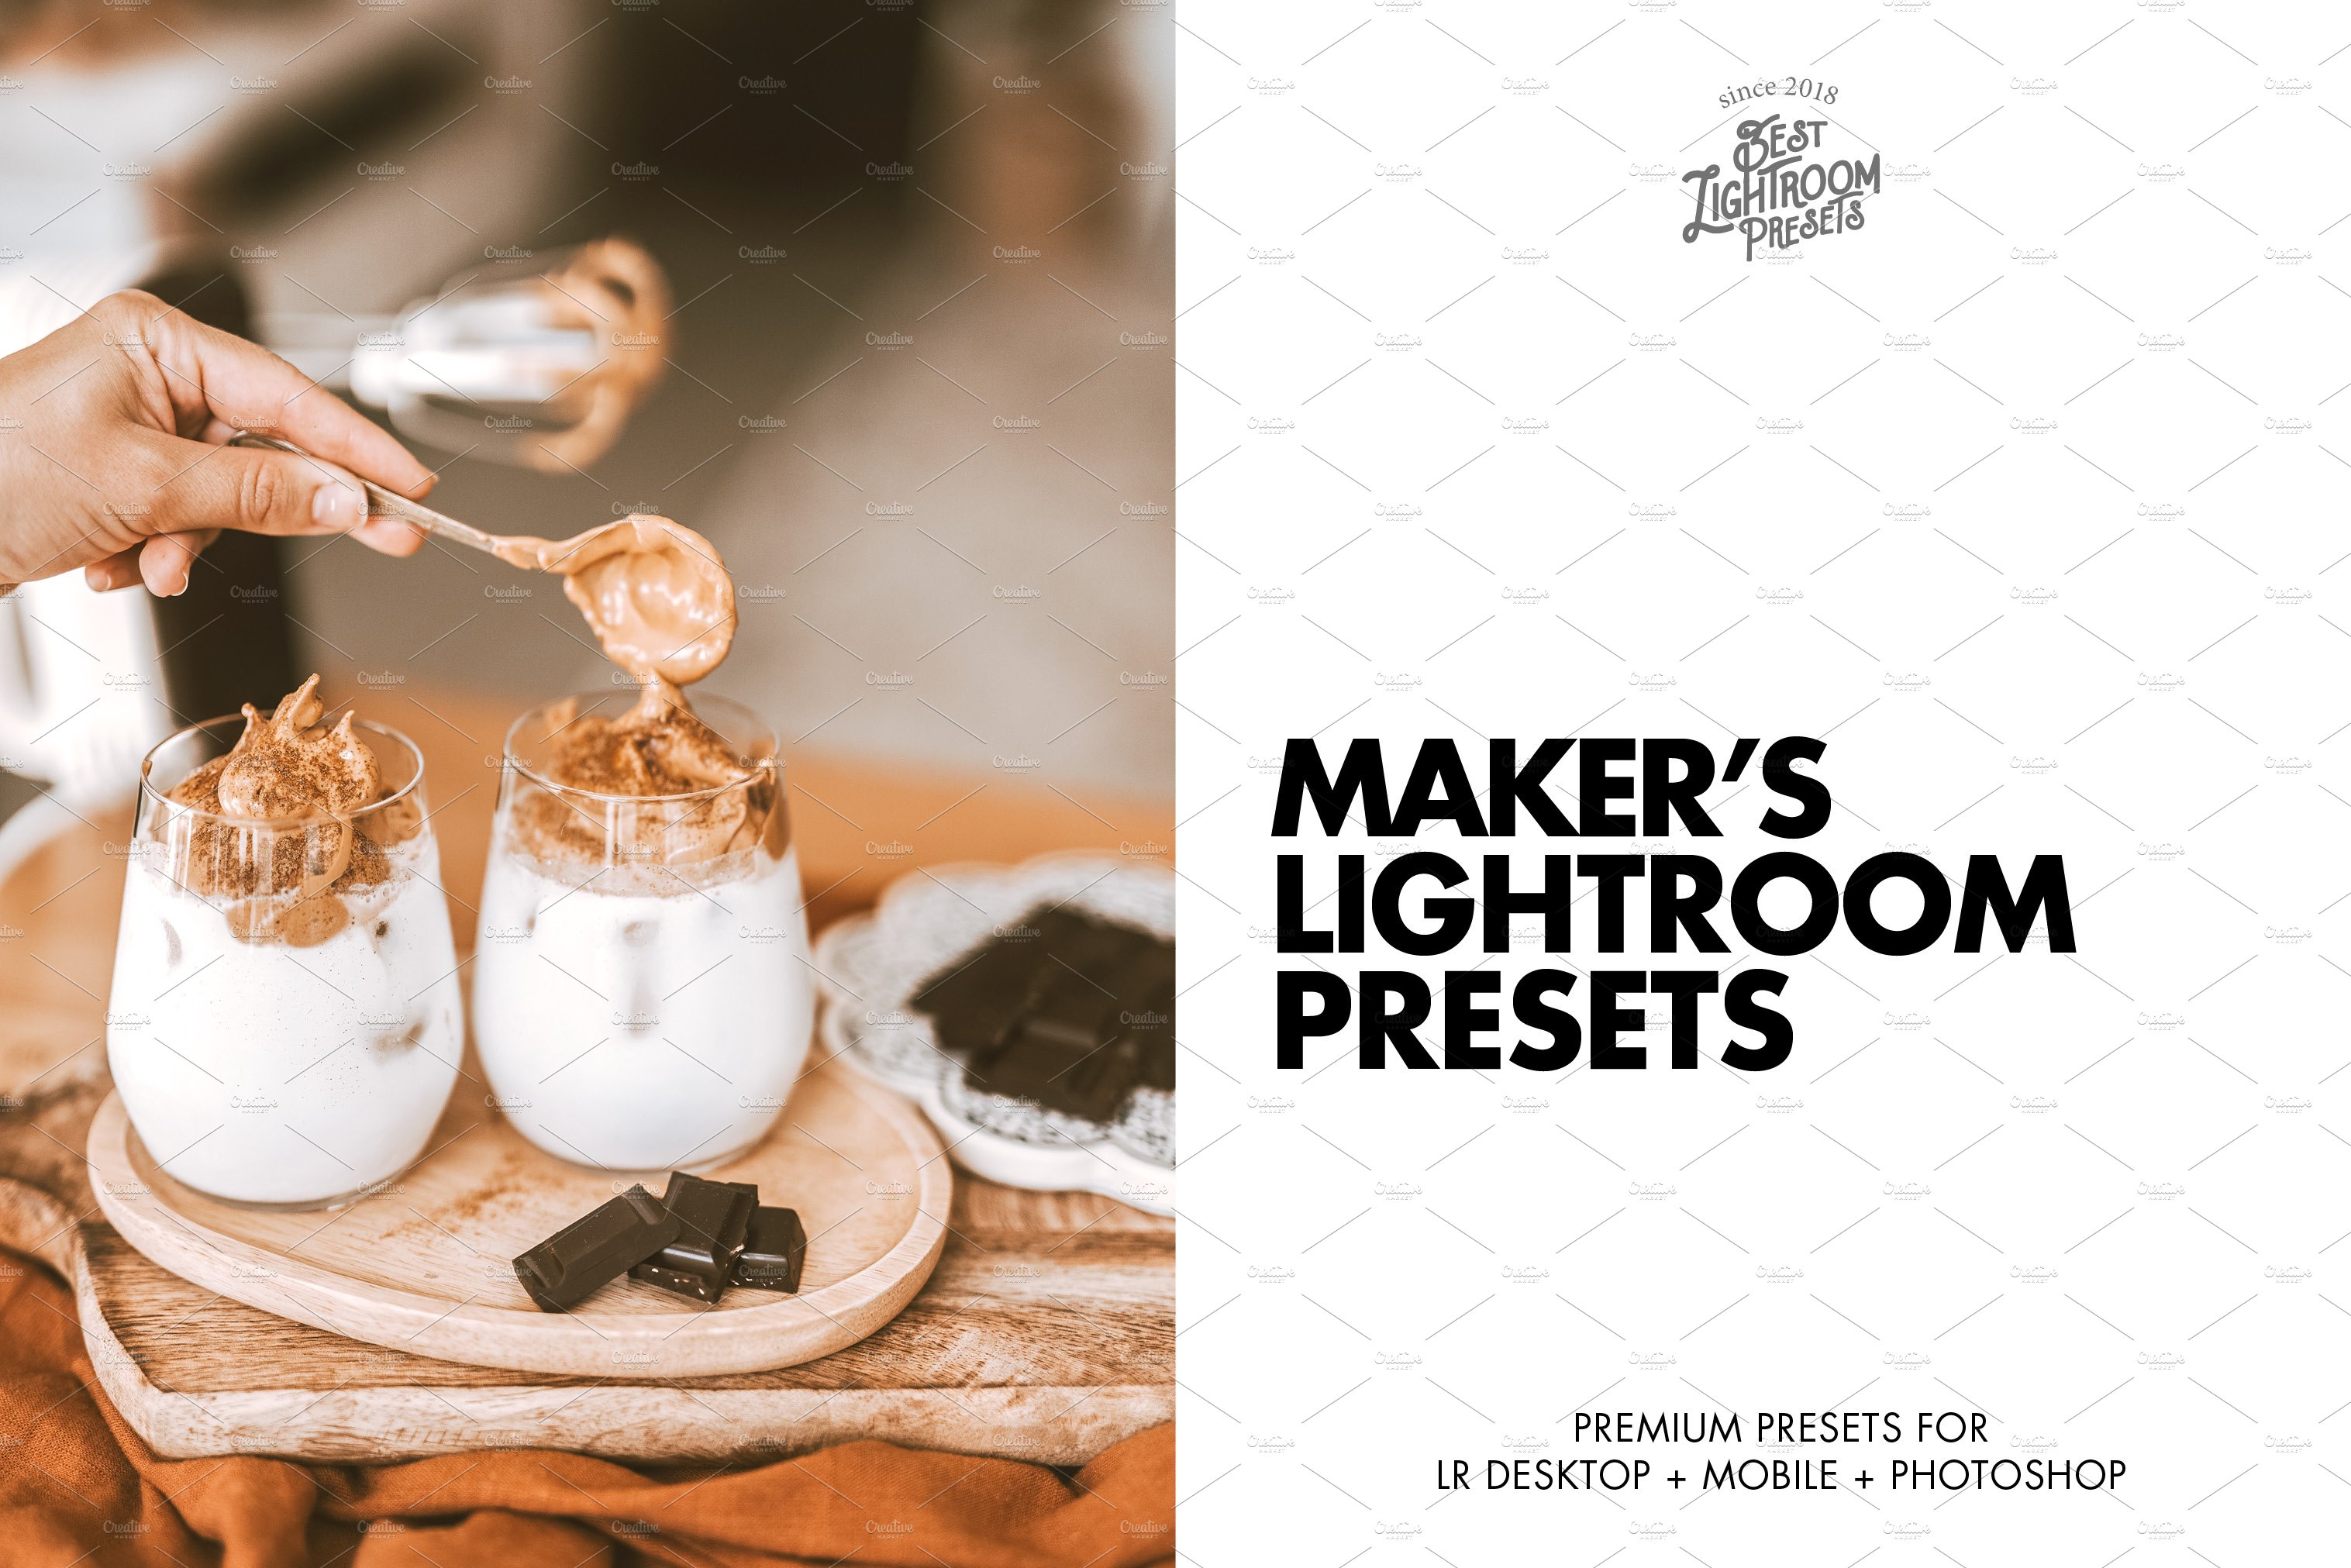 Lightroom Presets for Product & Foodcover image.